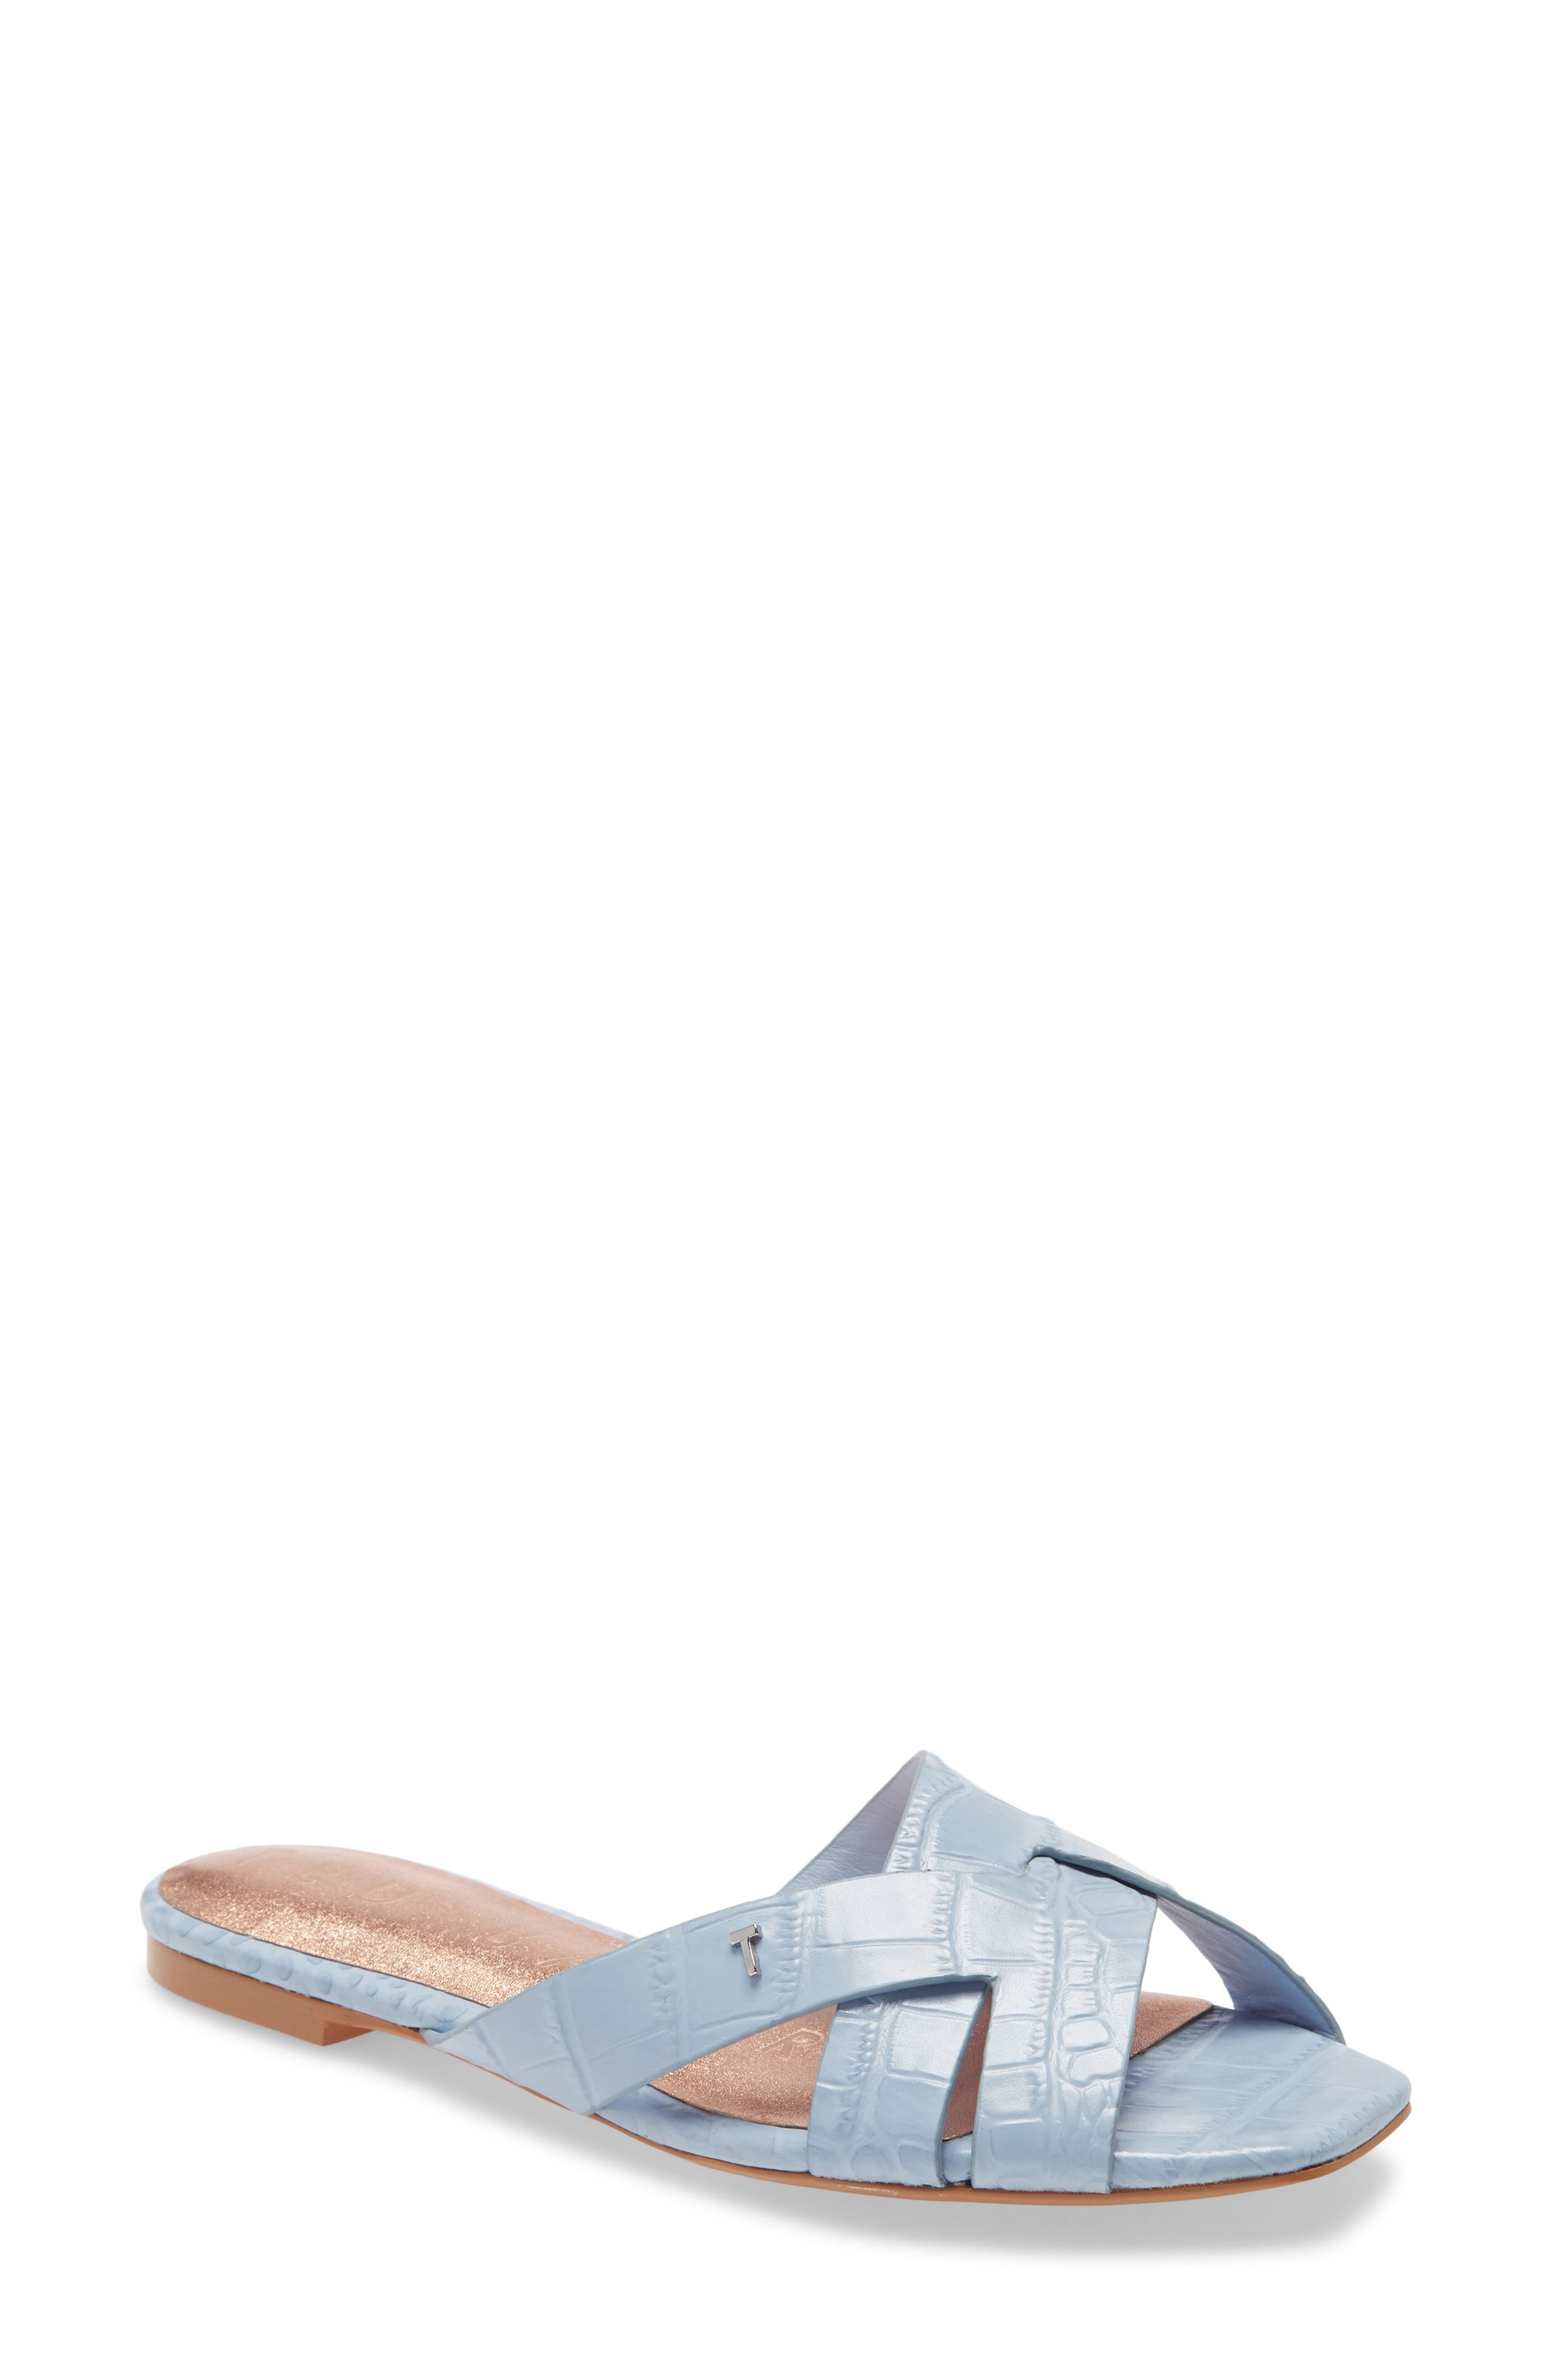 Women's Ted Baker London Sandals and 